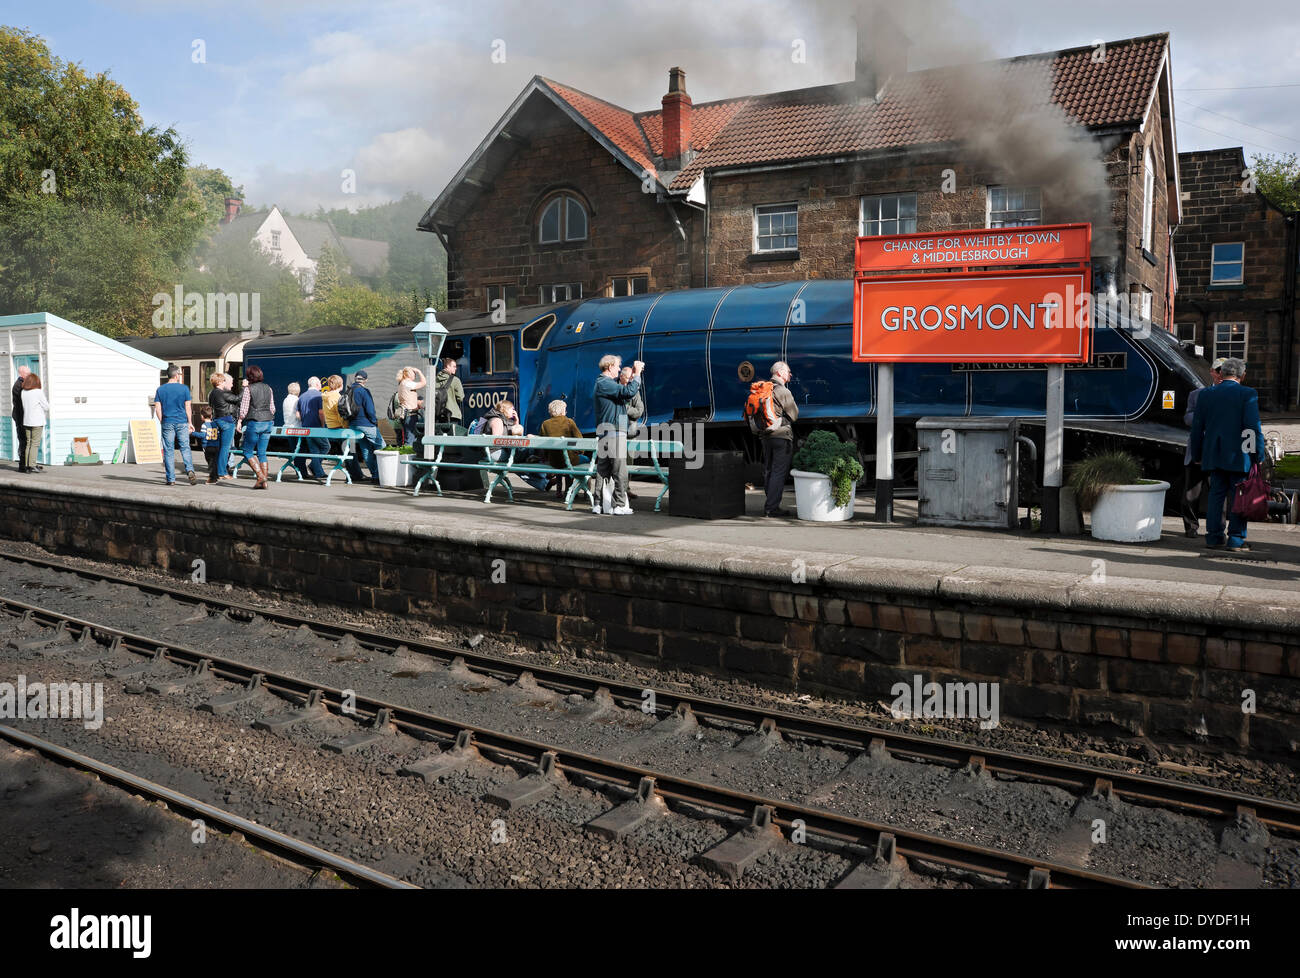 A4 Pacific class locomotive Sir Nigel Gresley at Grosmont Station on the North Yorkshire Moors railway. Stock Photo